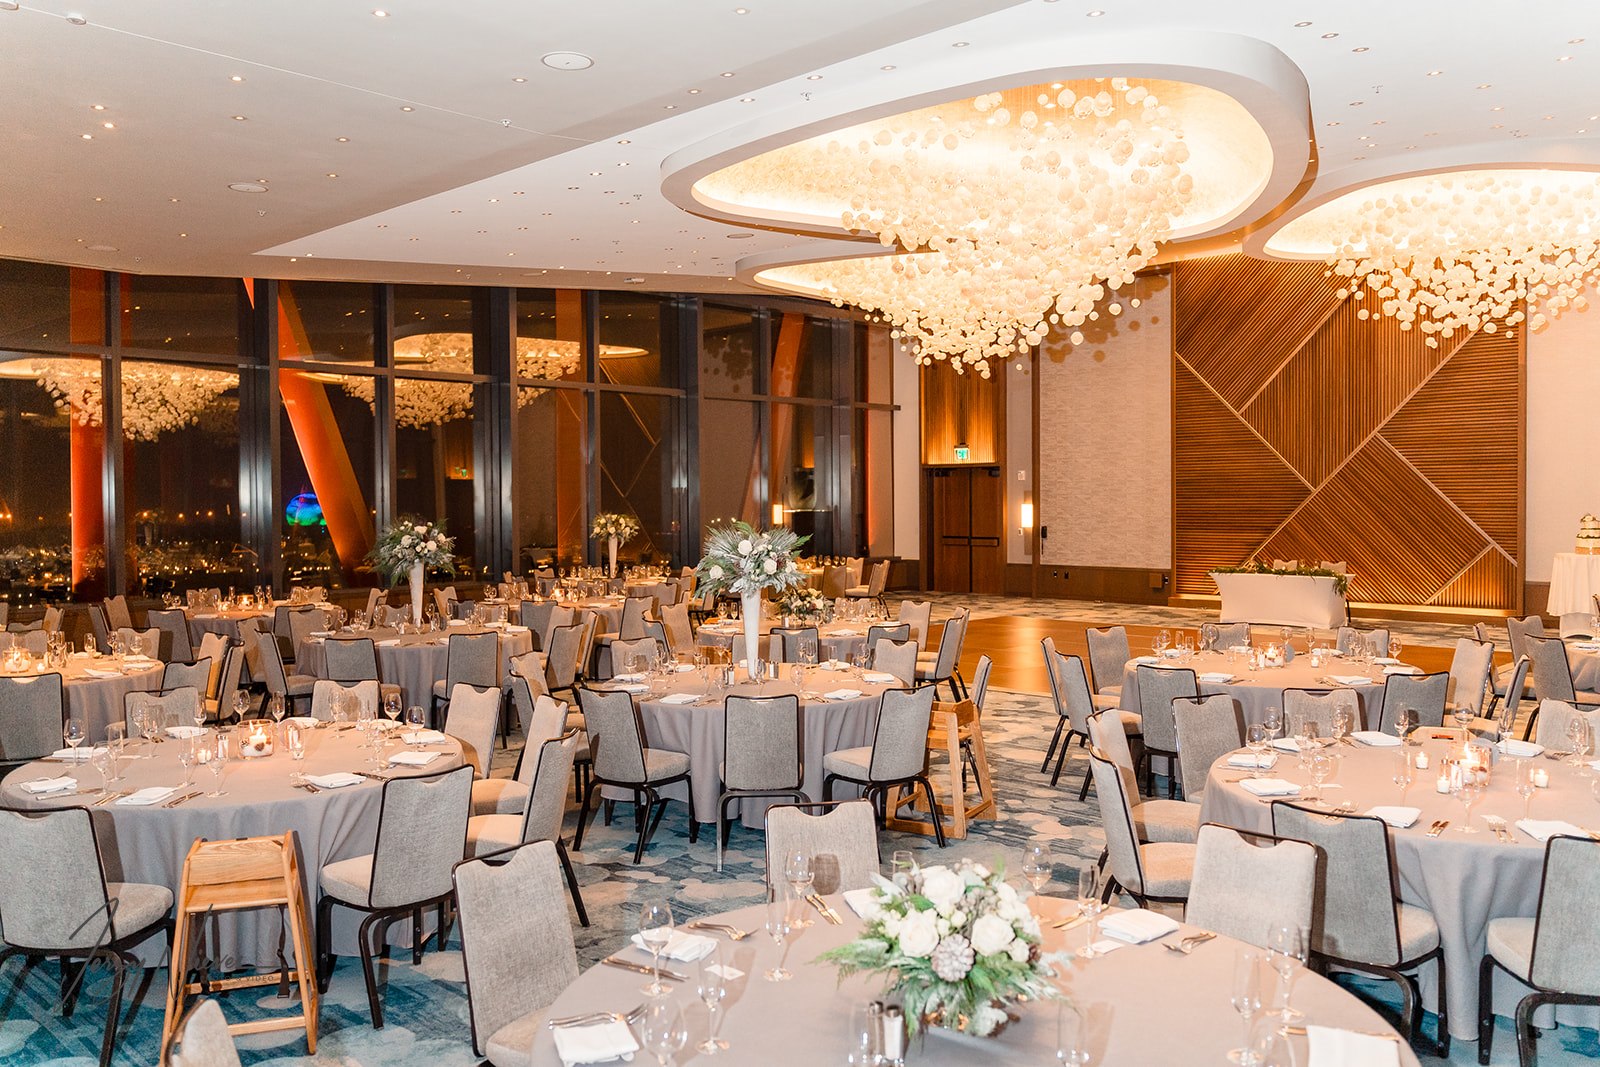 Elegant reception area at Disney Swan Reception Hall adorned with white tablecloths and flower bouquets on guest tables, with the couple's table situated on the stage.